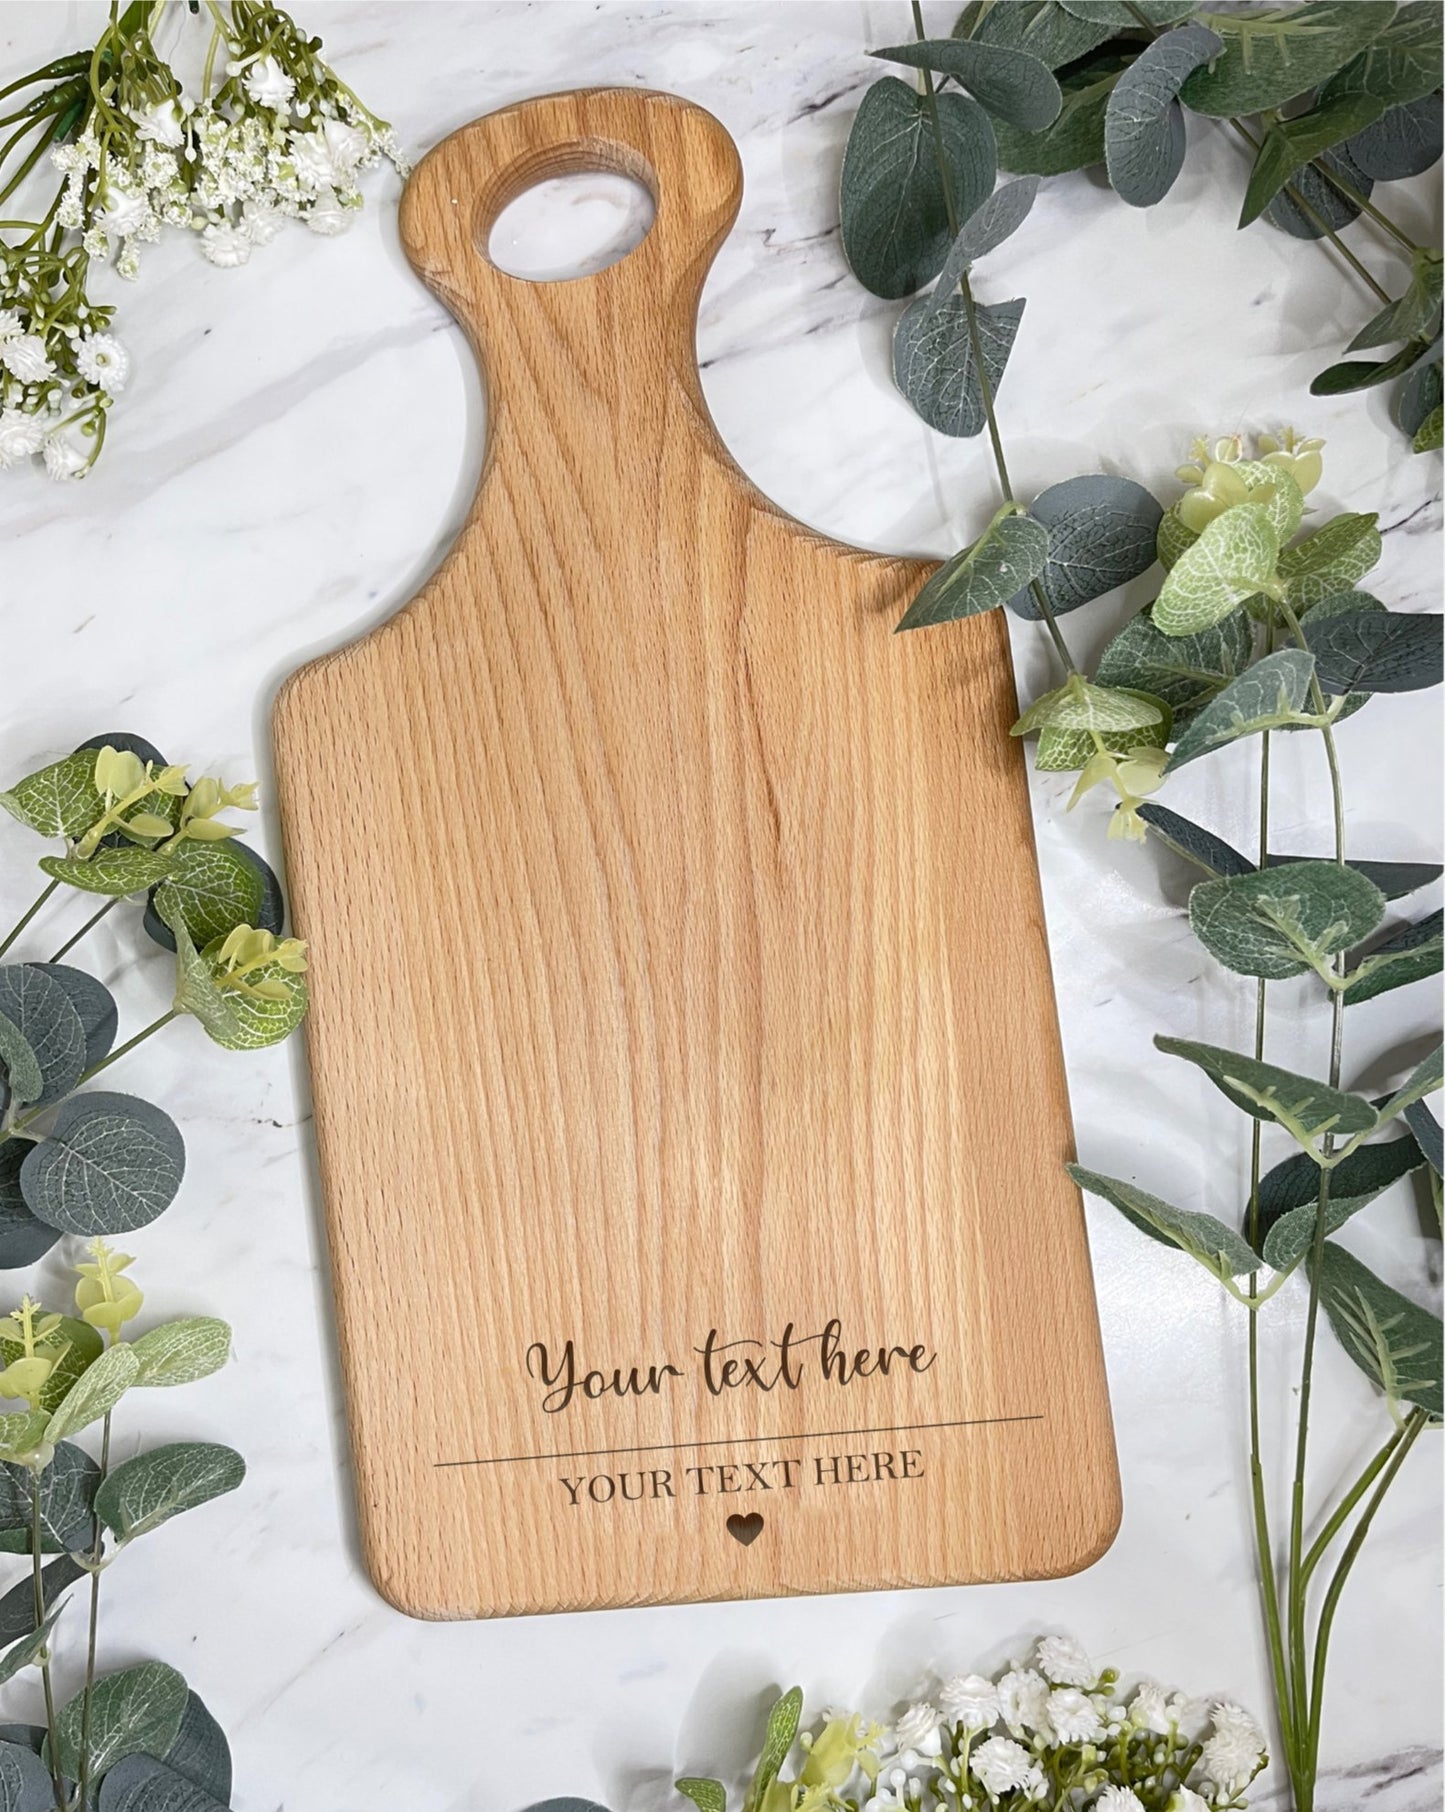 Customisable serving boards for special moments: Mother's Day, Father's Day, housewarmings, anniversaries, weddings, and Christmas. Create with up to 17 characters per line.